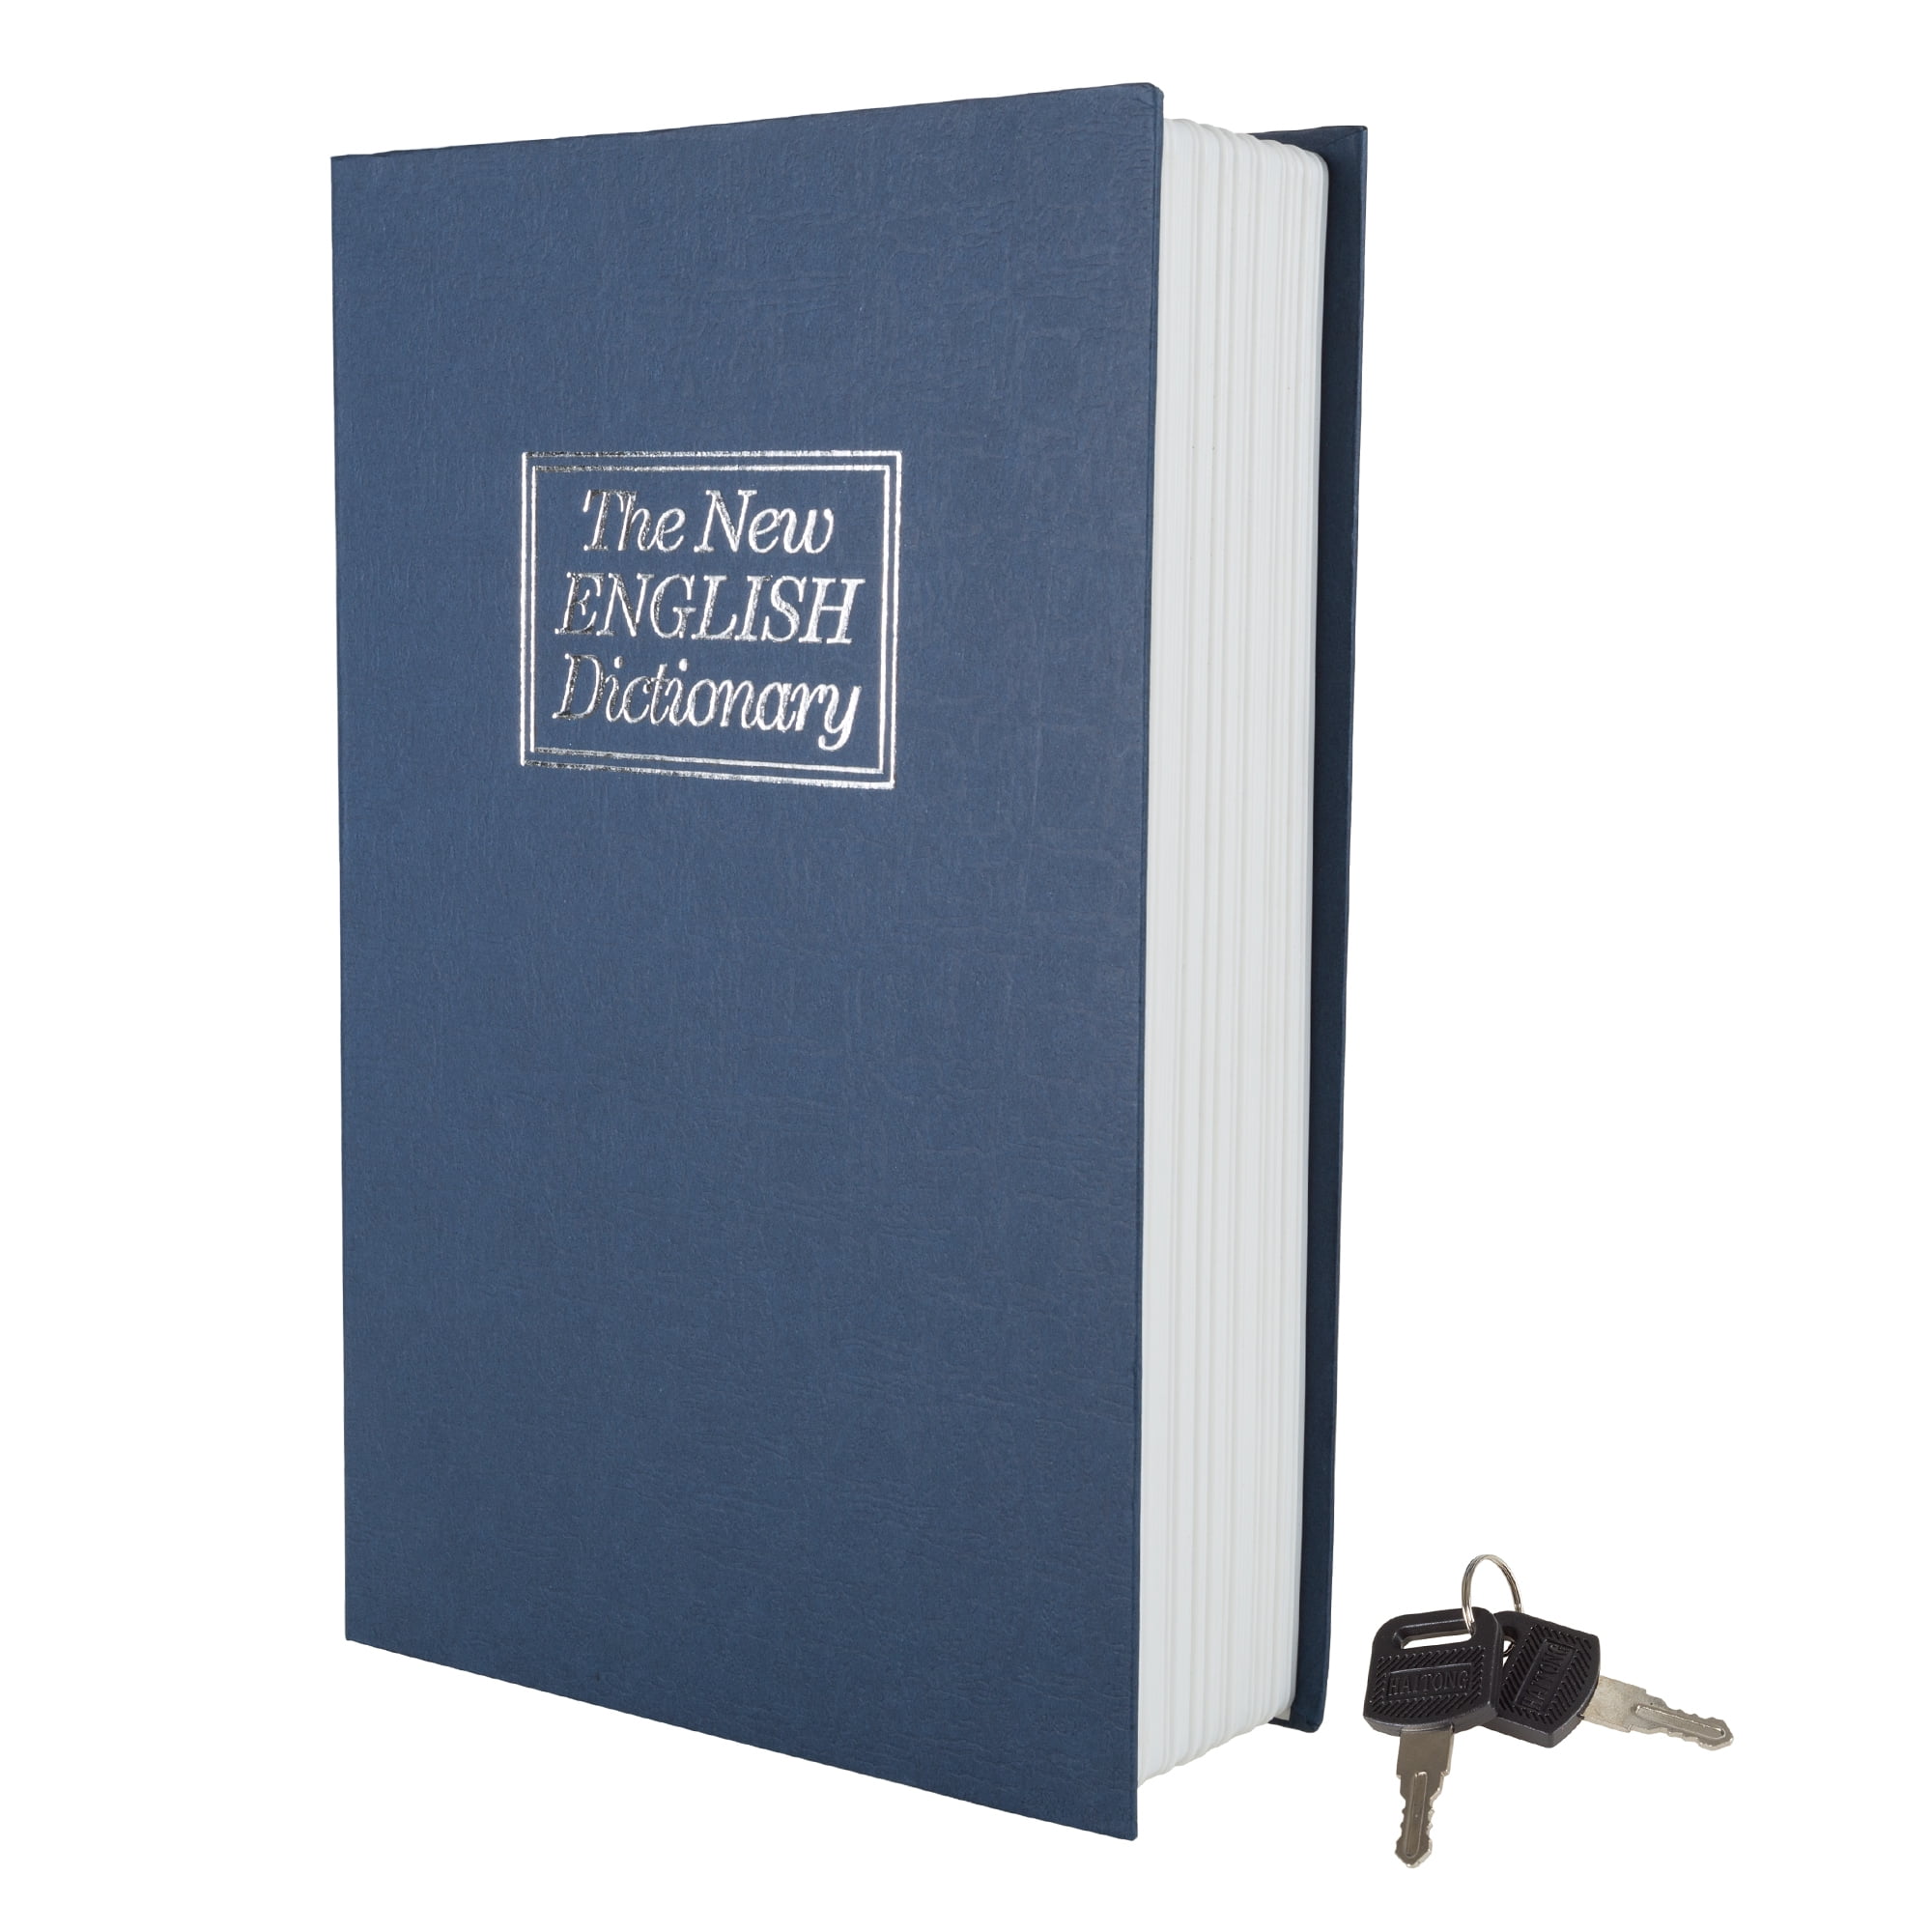 Dictionary Safe Secret Diversion Book Metal Box with Key Lock Large Capacity 